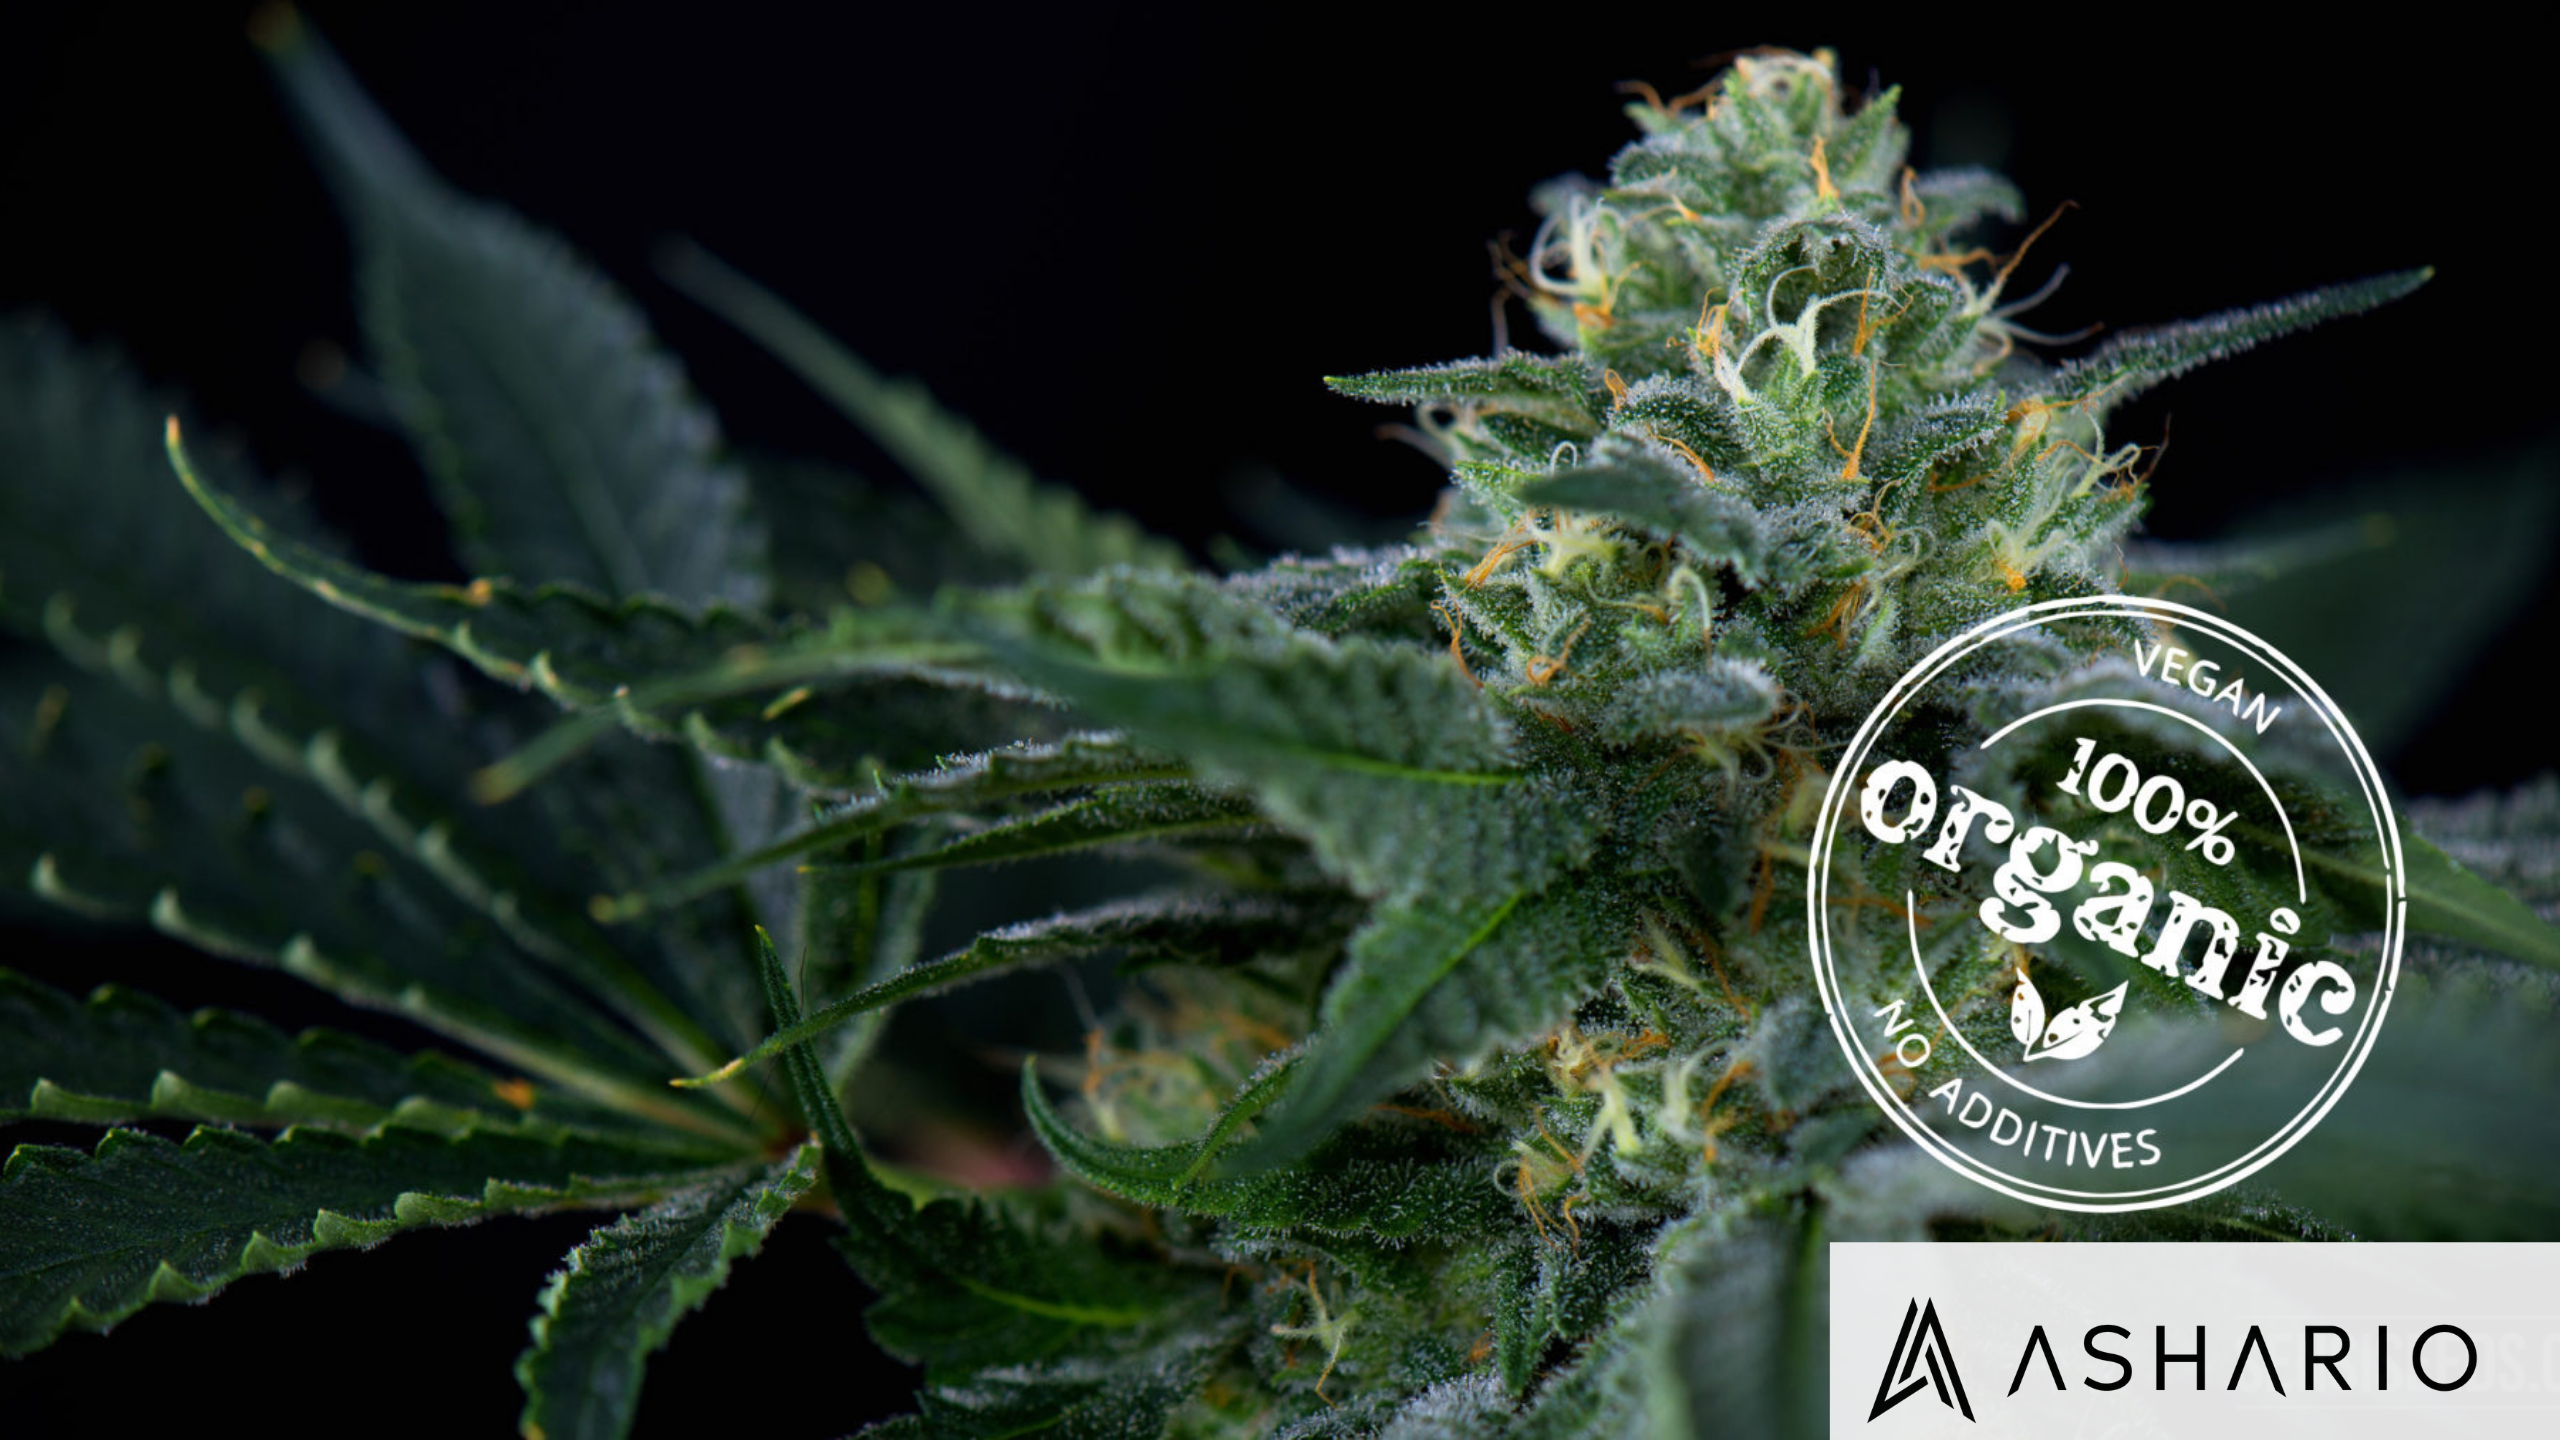 Ashario Cannabis leads the way in North York with its pioneering approach to organic cannabis cultivation.